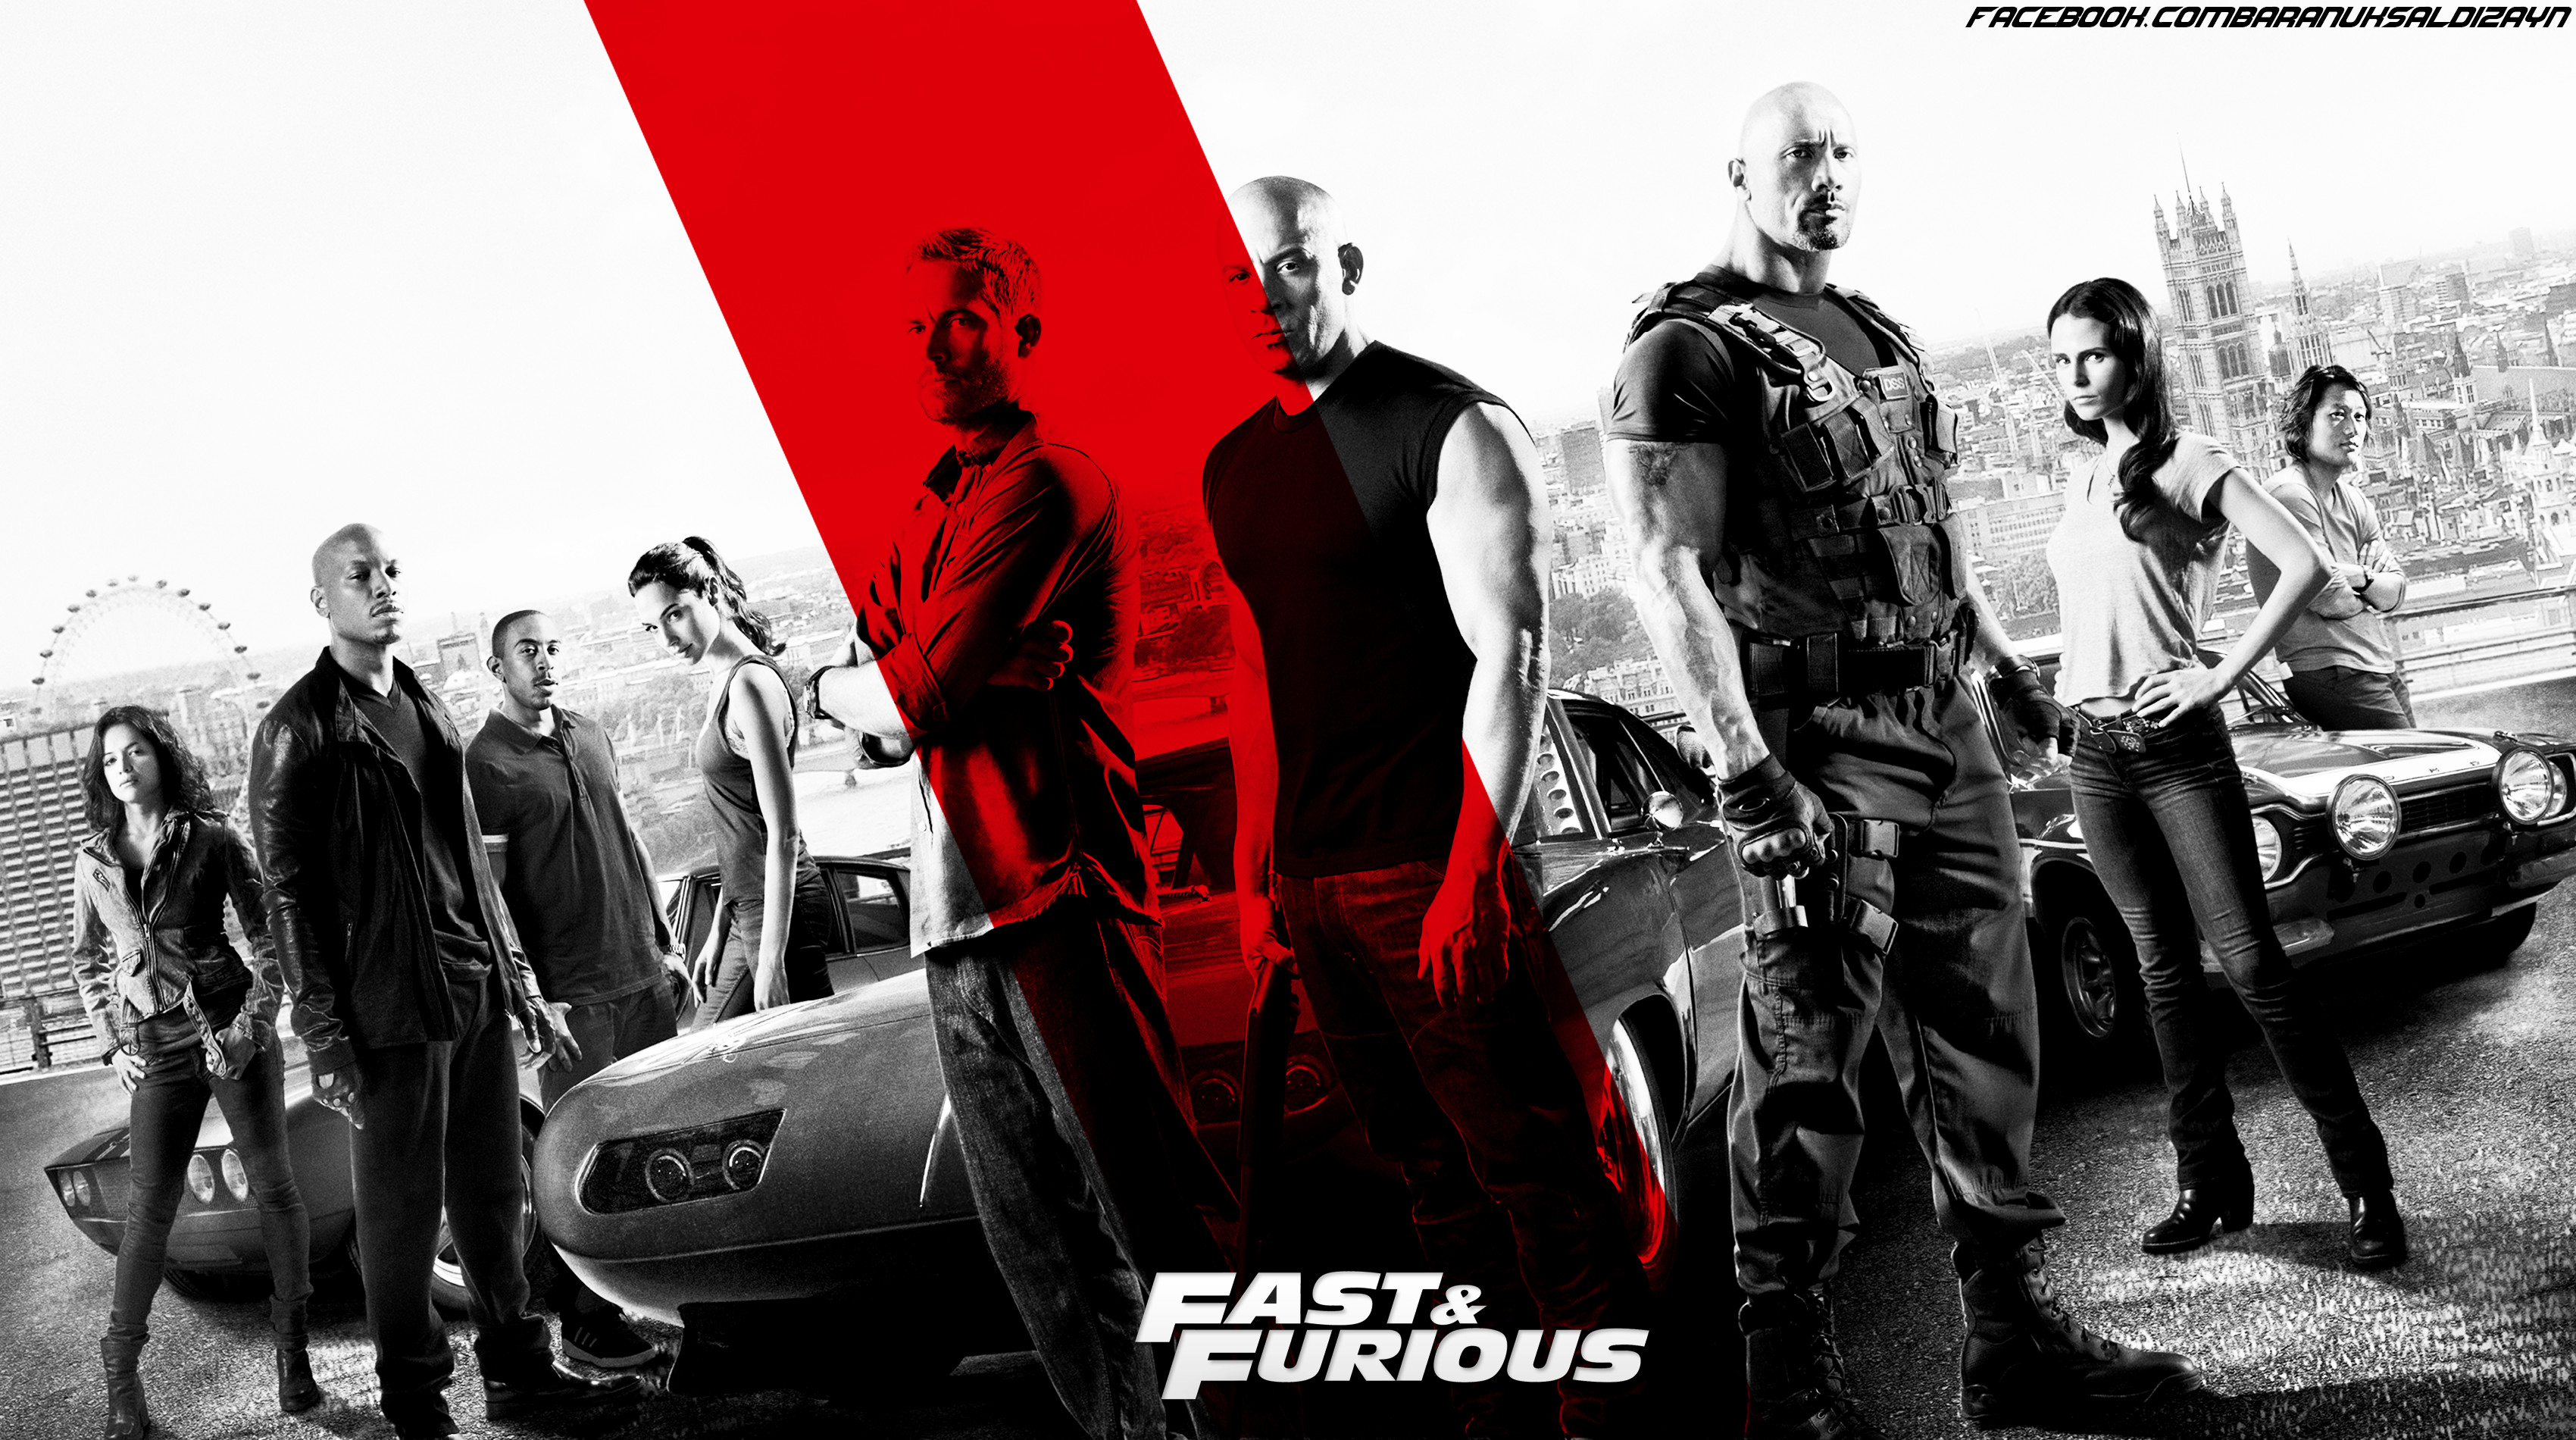 Fast and Furious Wallpaper (77+ images)